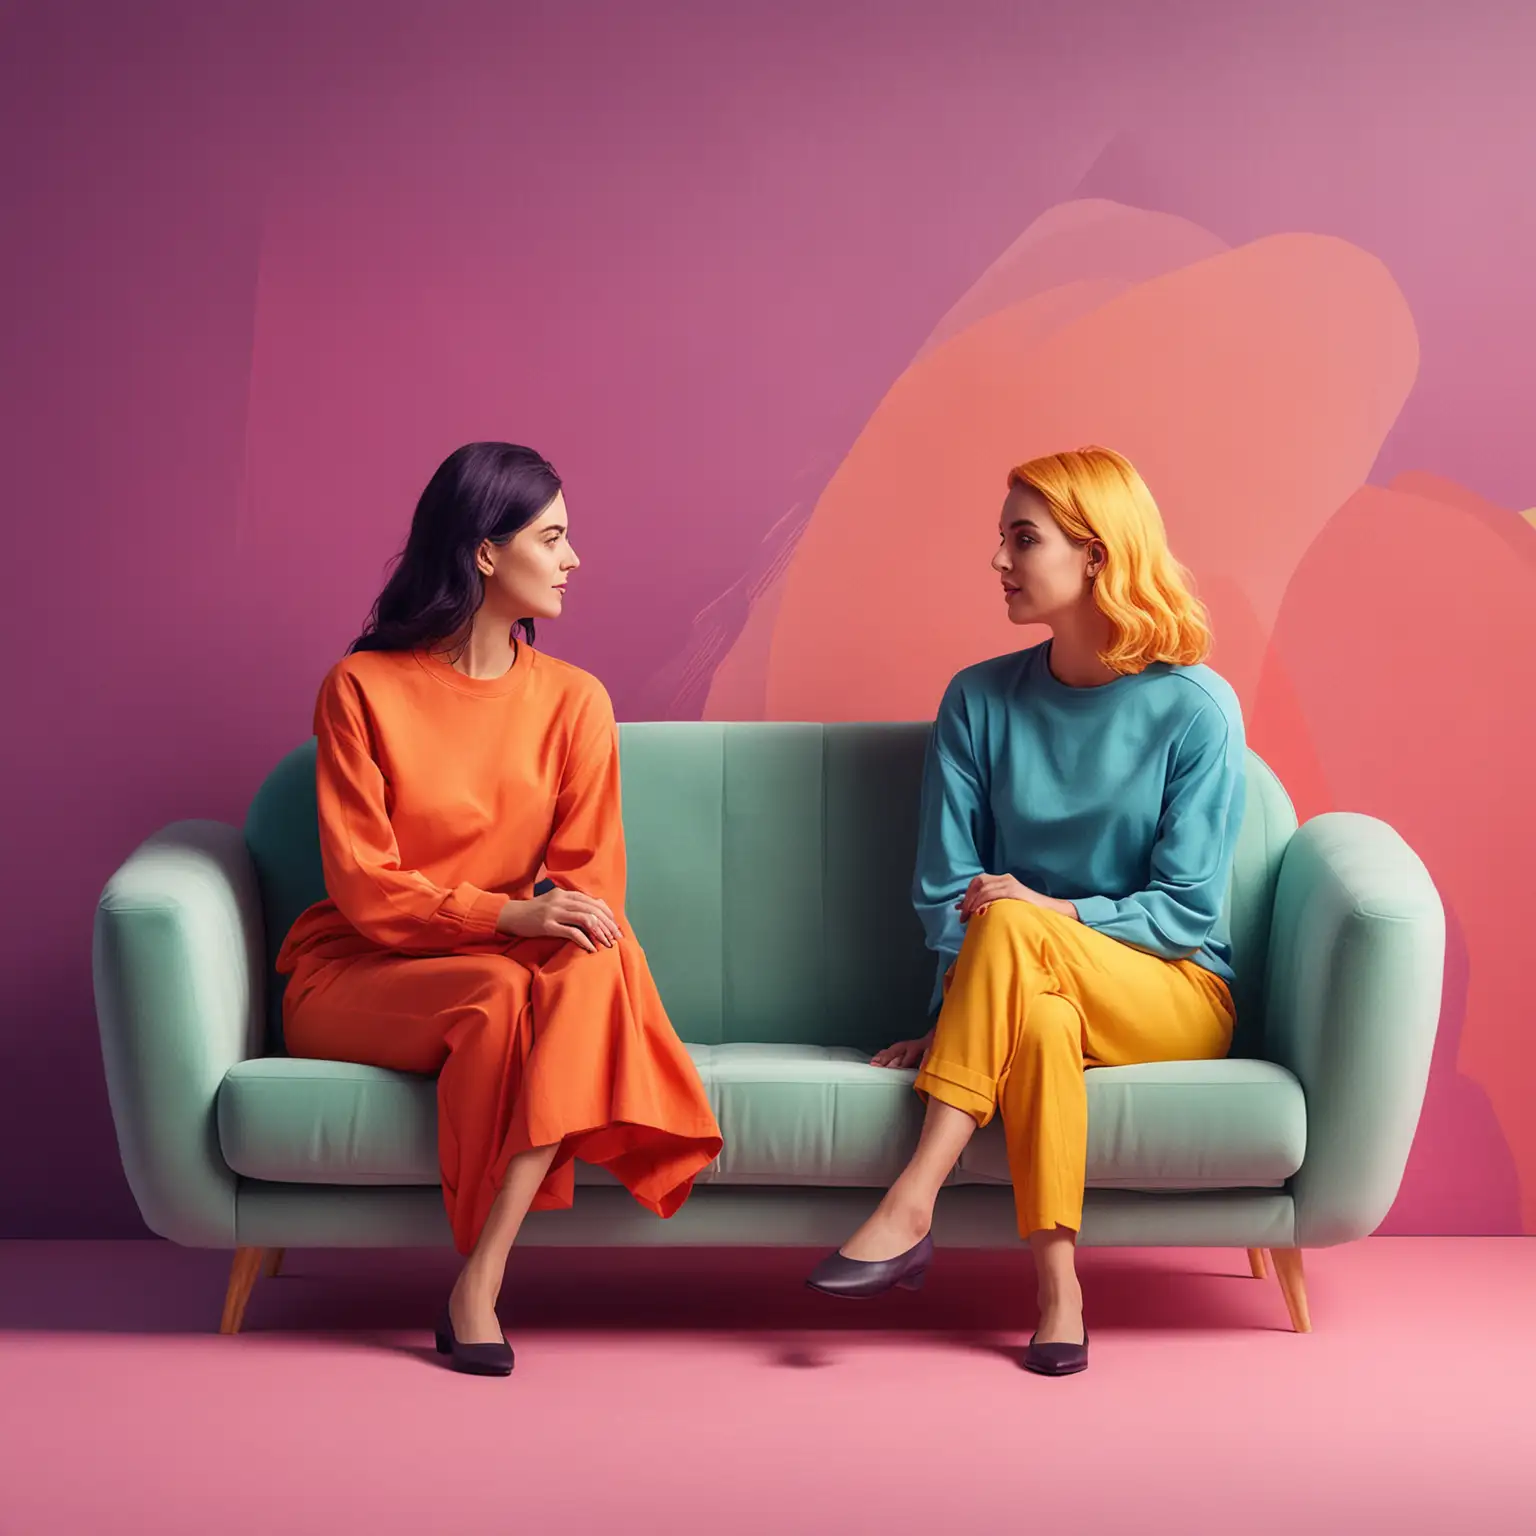 abstract design of two women sitting on a sofa talking on a colorful background illustration style